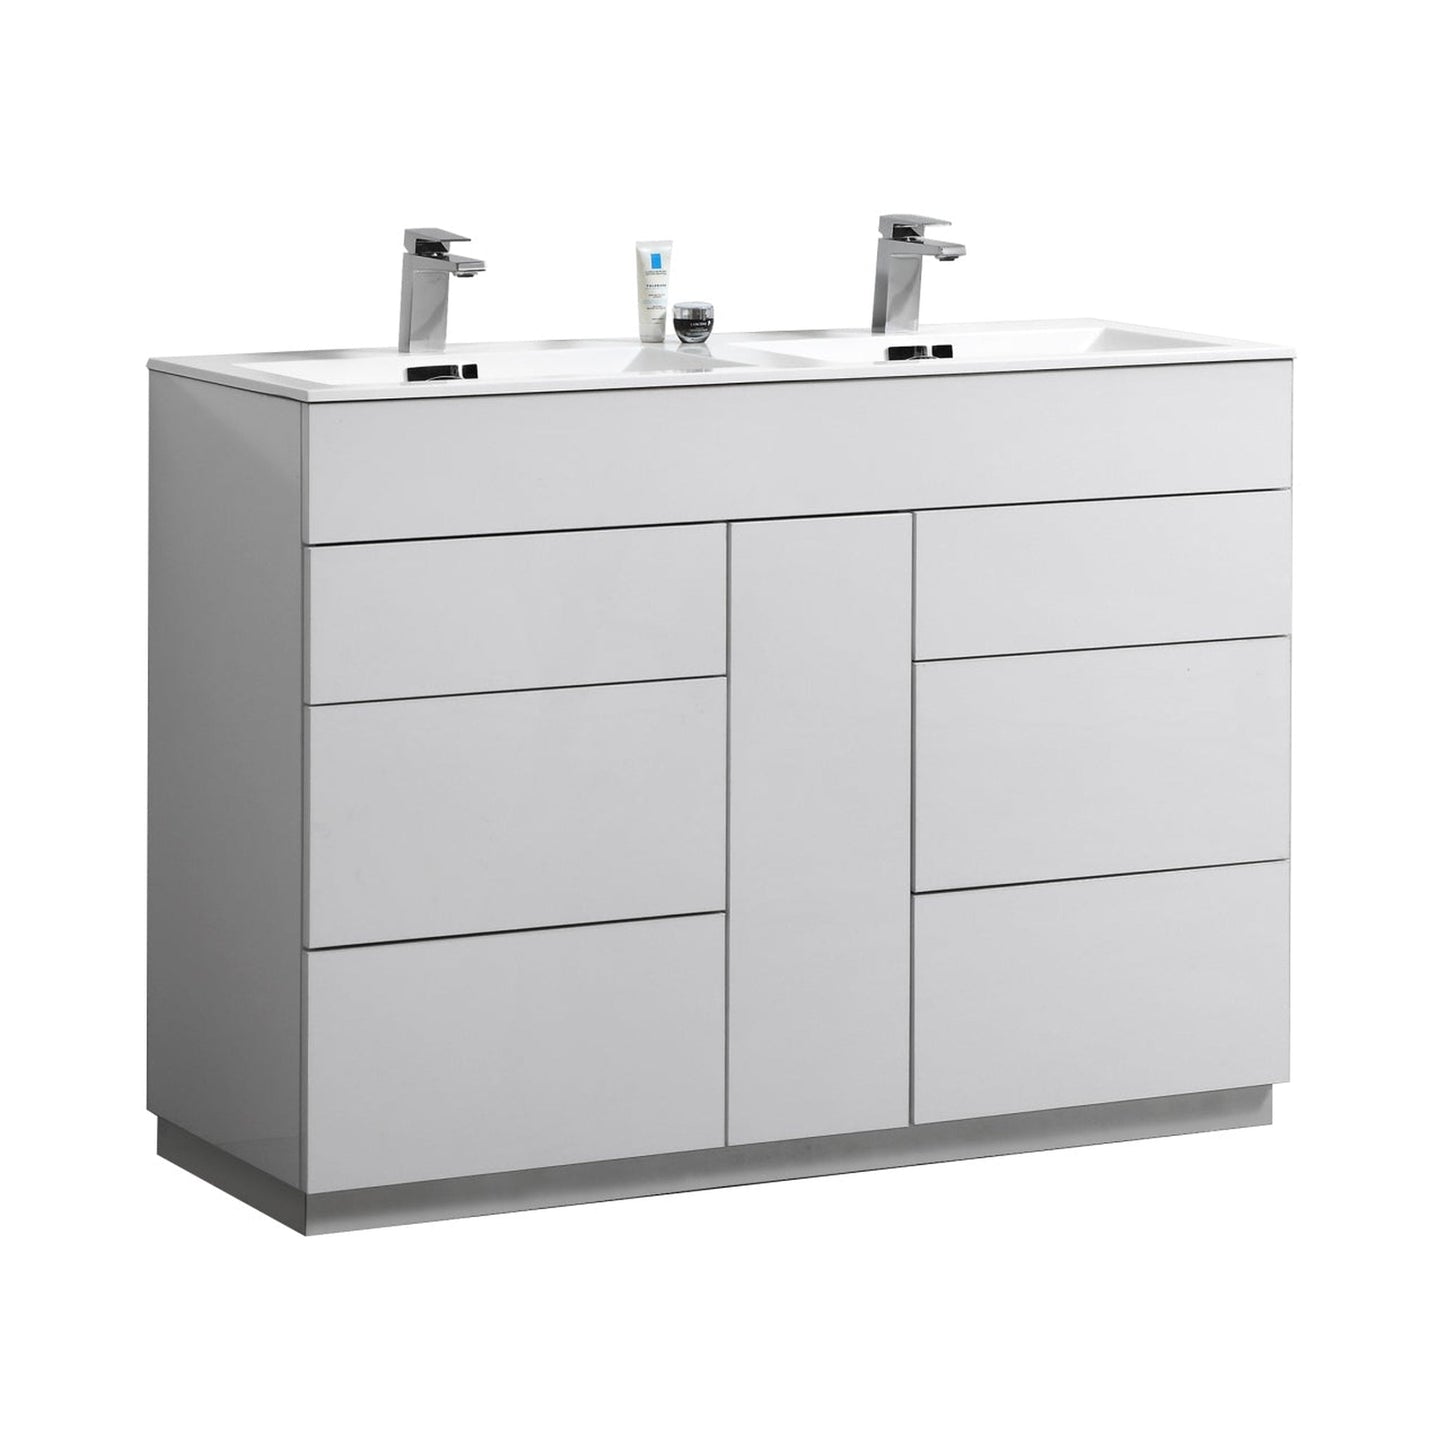 KubeBath Milano 48" High Gloss White Freestanding Modern Bathroom Vanity With Double Integrated Acrylic Sink With Overflow and 48" White Framed Mirror With Shelf